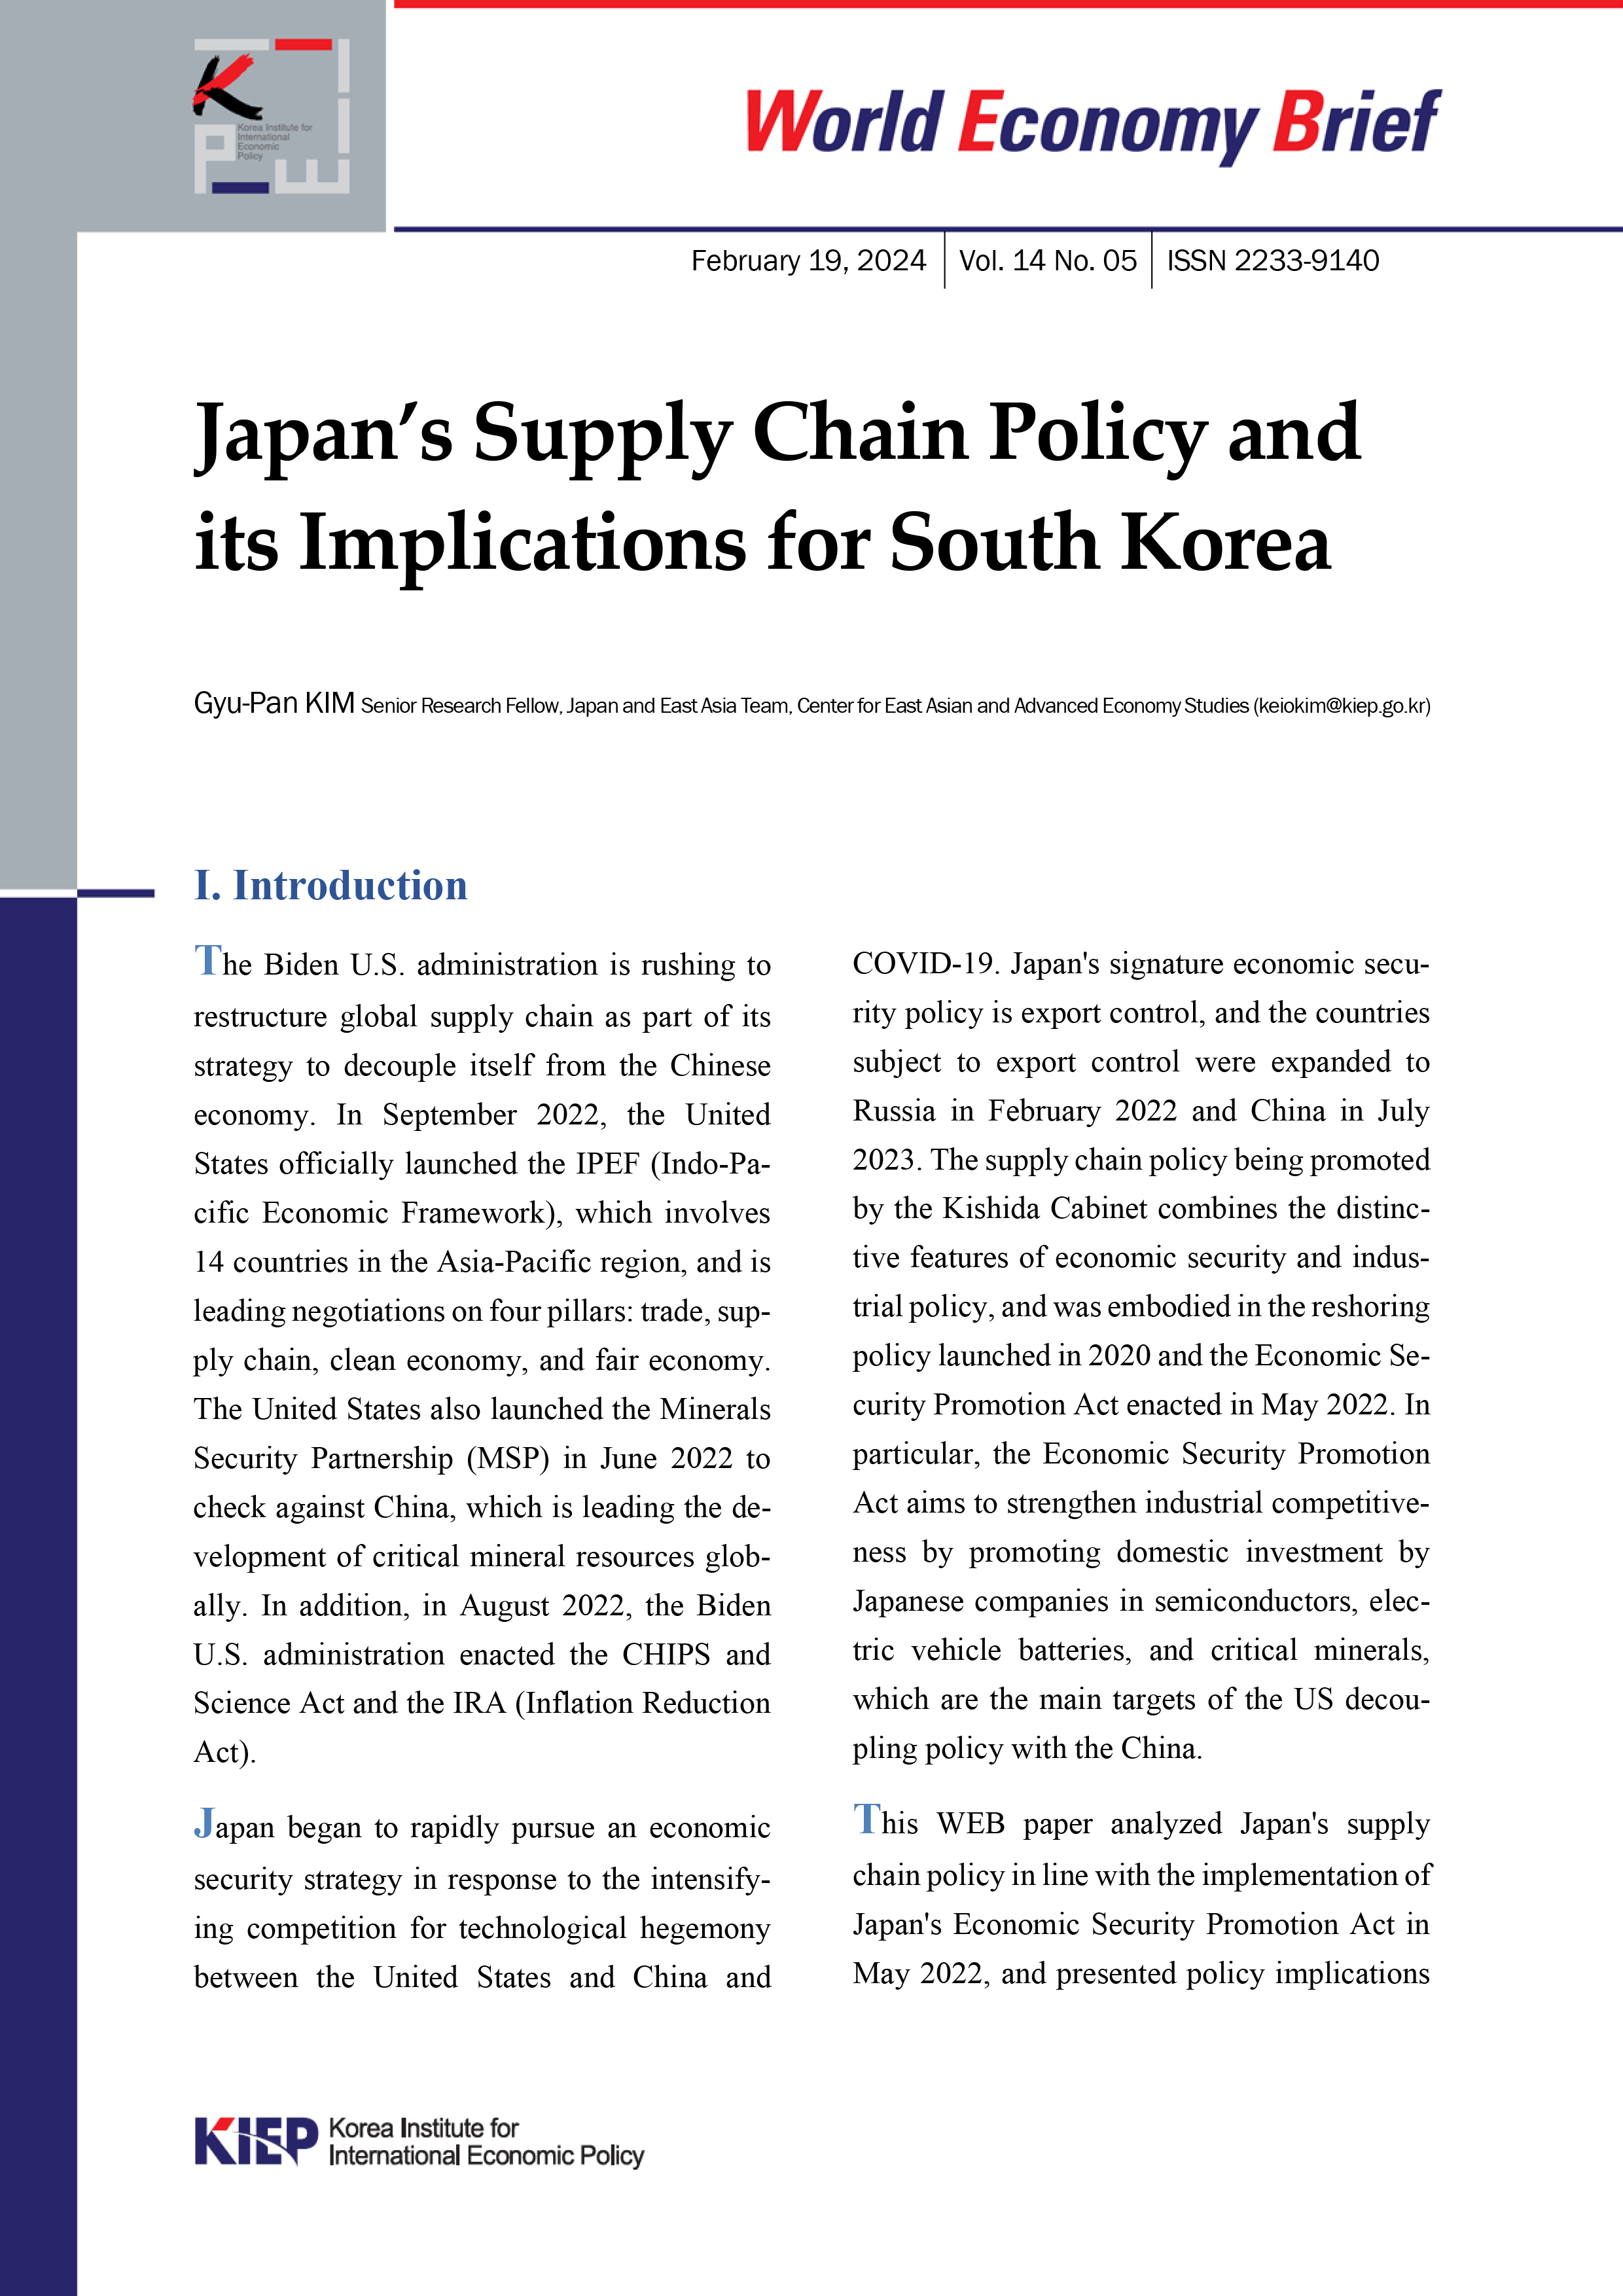 Japan’s Supply Chain Policy and its Implications for South Korea